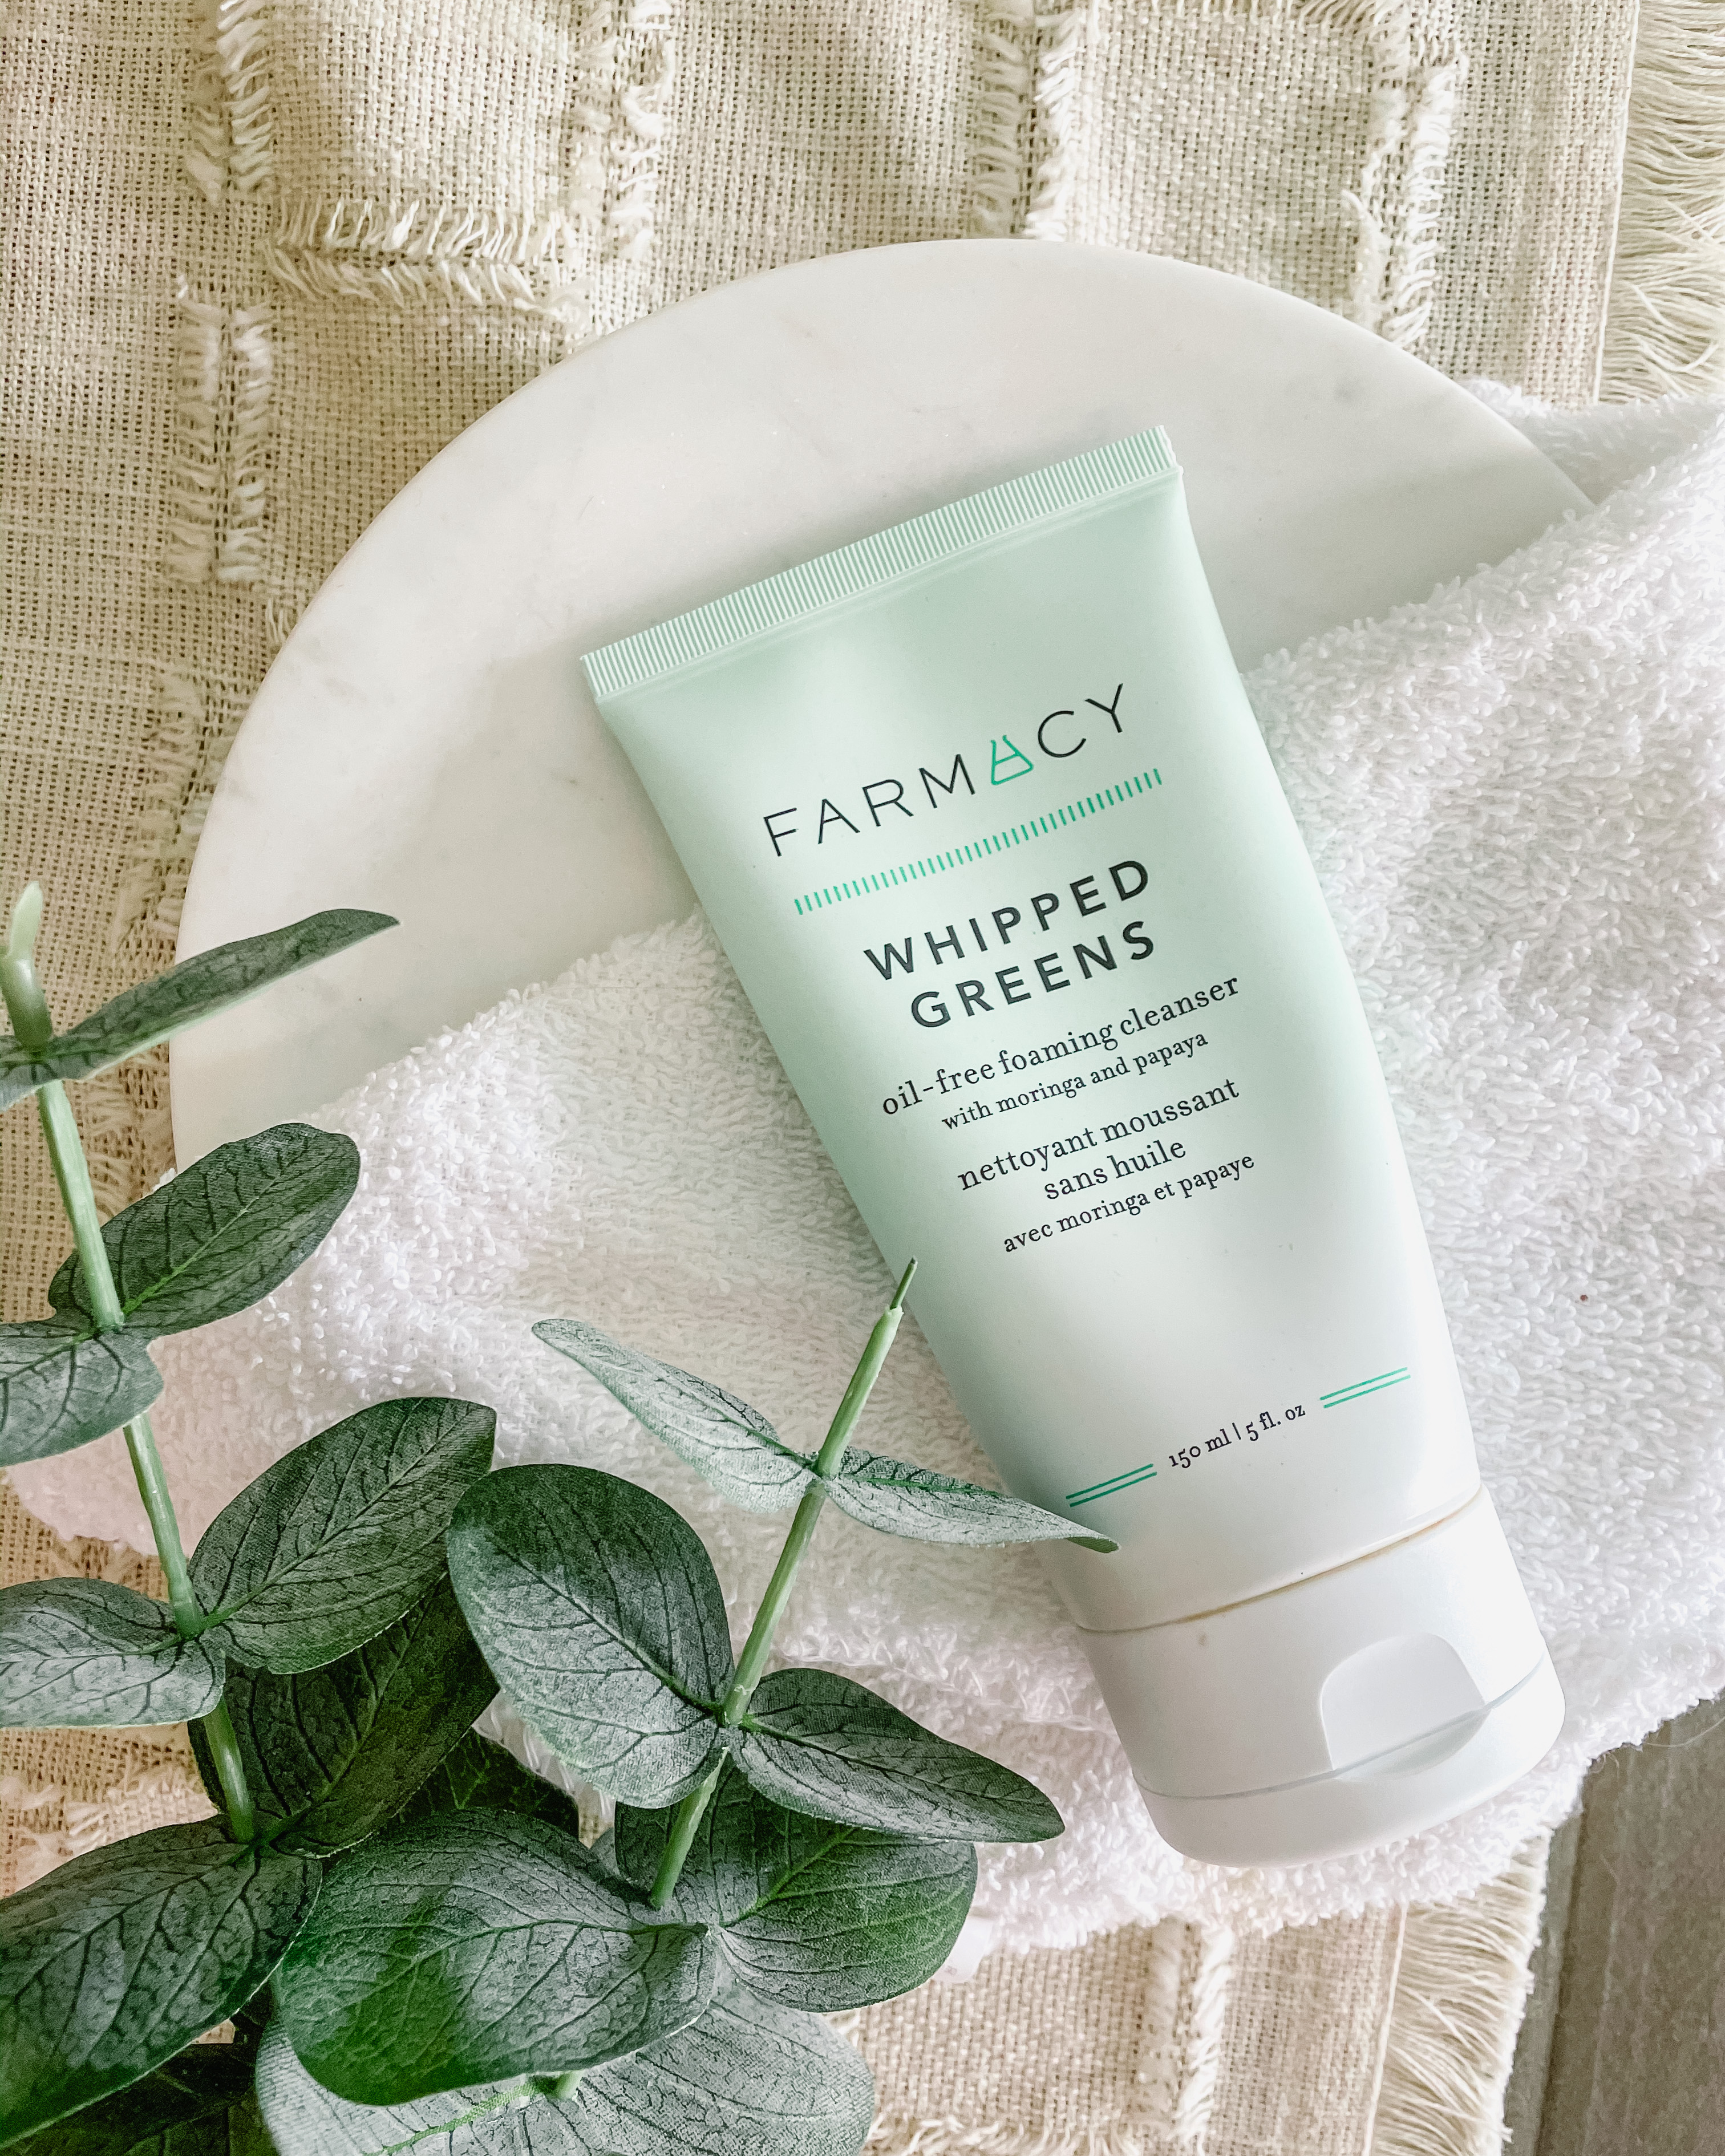 Farmacy Whipped Greens: Oil-Free Foaming Cleanser with Moringa and Papaya review | Affordable by Amanda